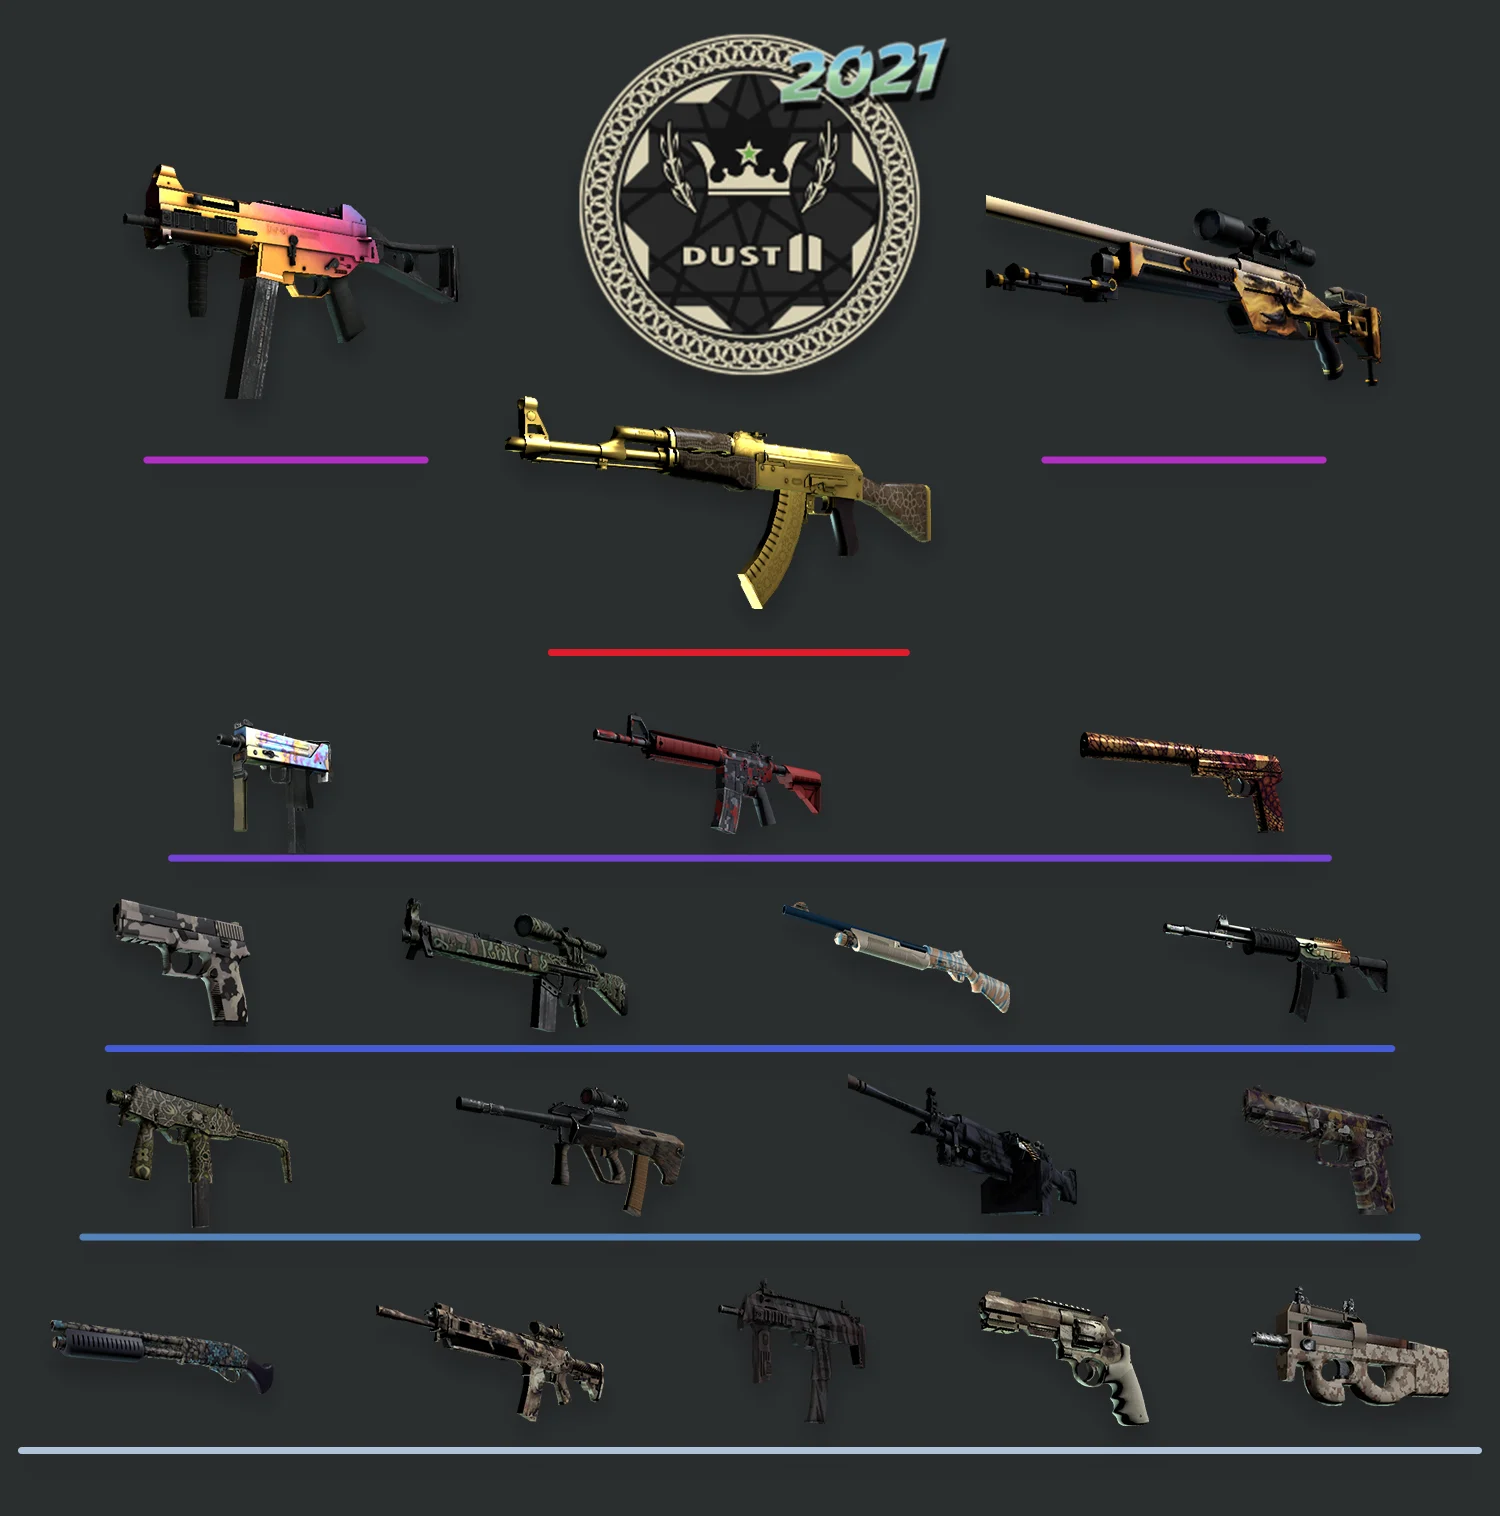 The 2021 Dust II Collection